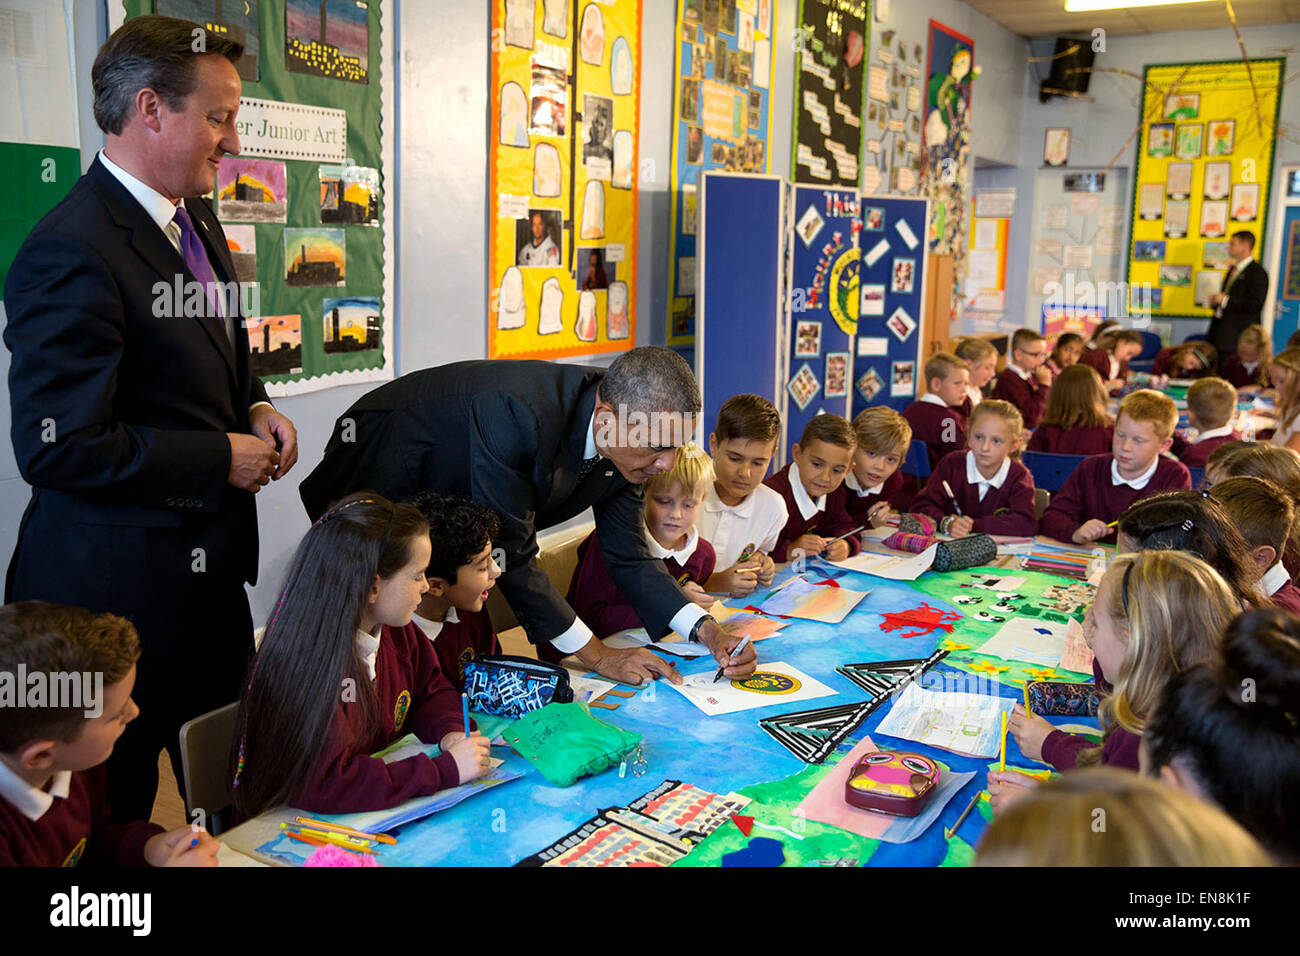 President Barack Obama and Prime Minister David Cameron of the United Kingdom visit with students in a classroom at Mount Pleasant Primary School in Newport, Wales, Sept. 4, 2014. Stock Photo